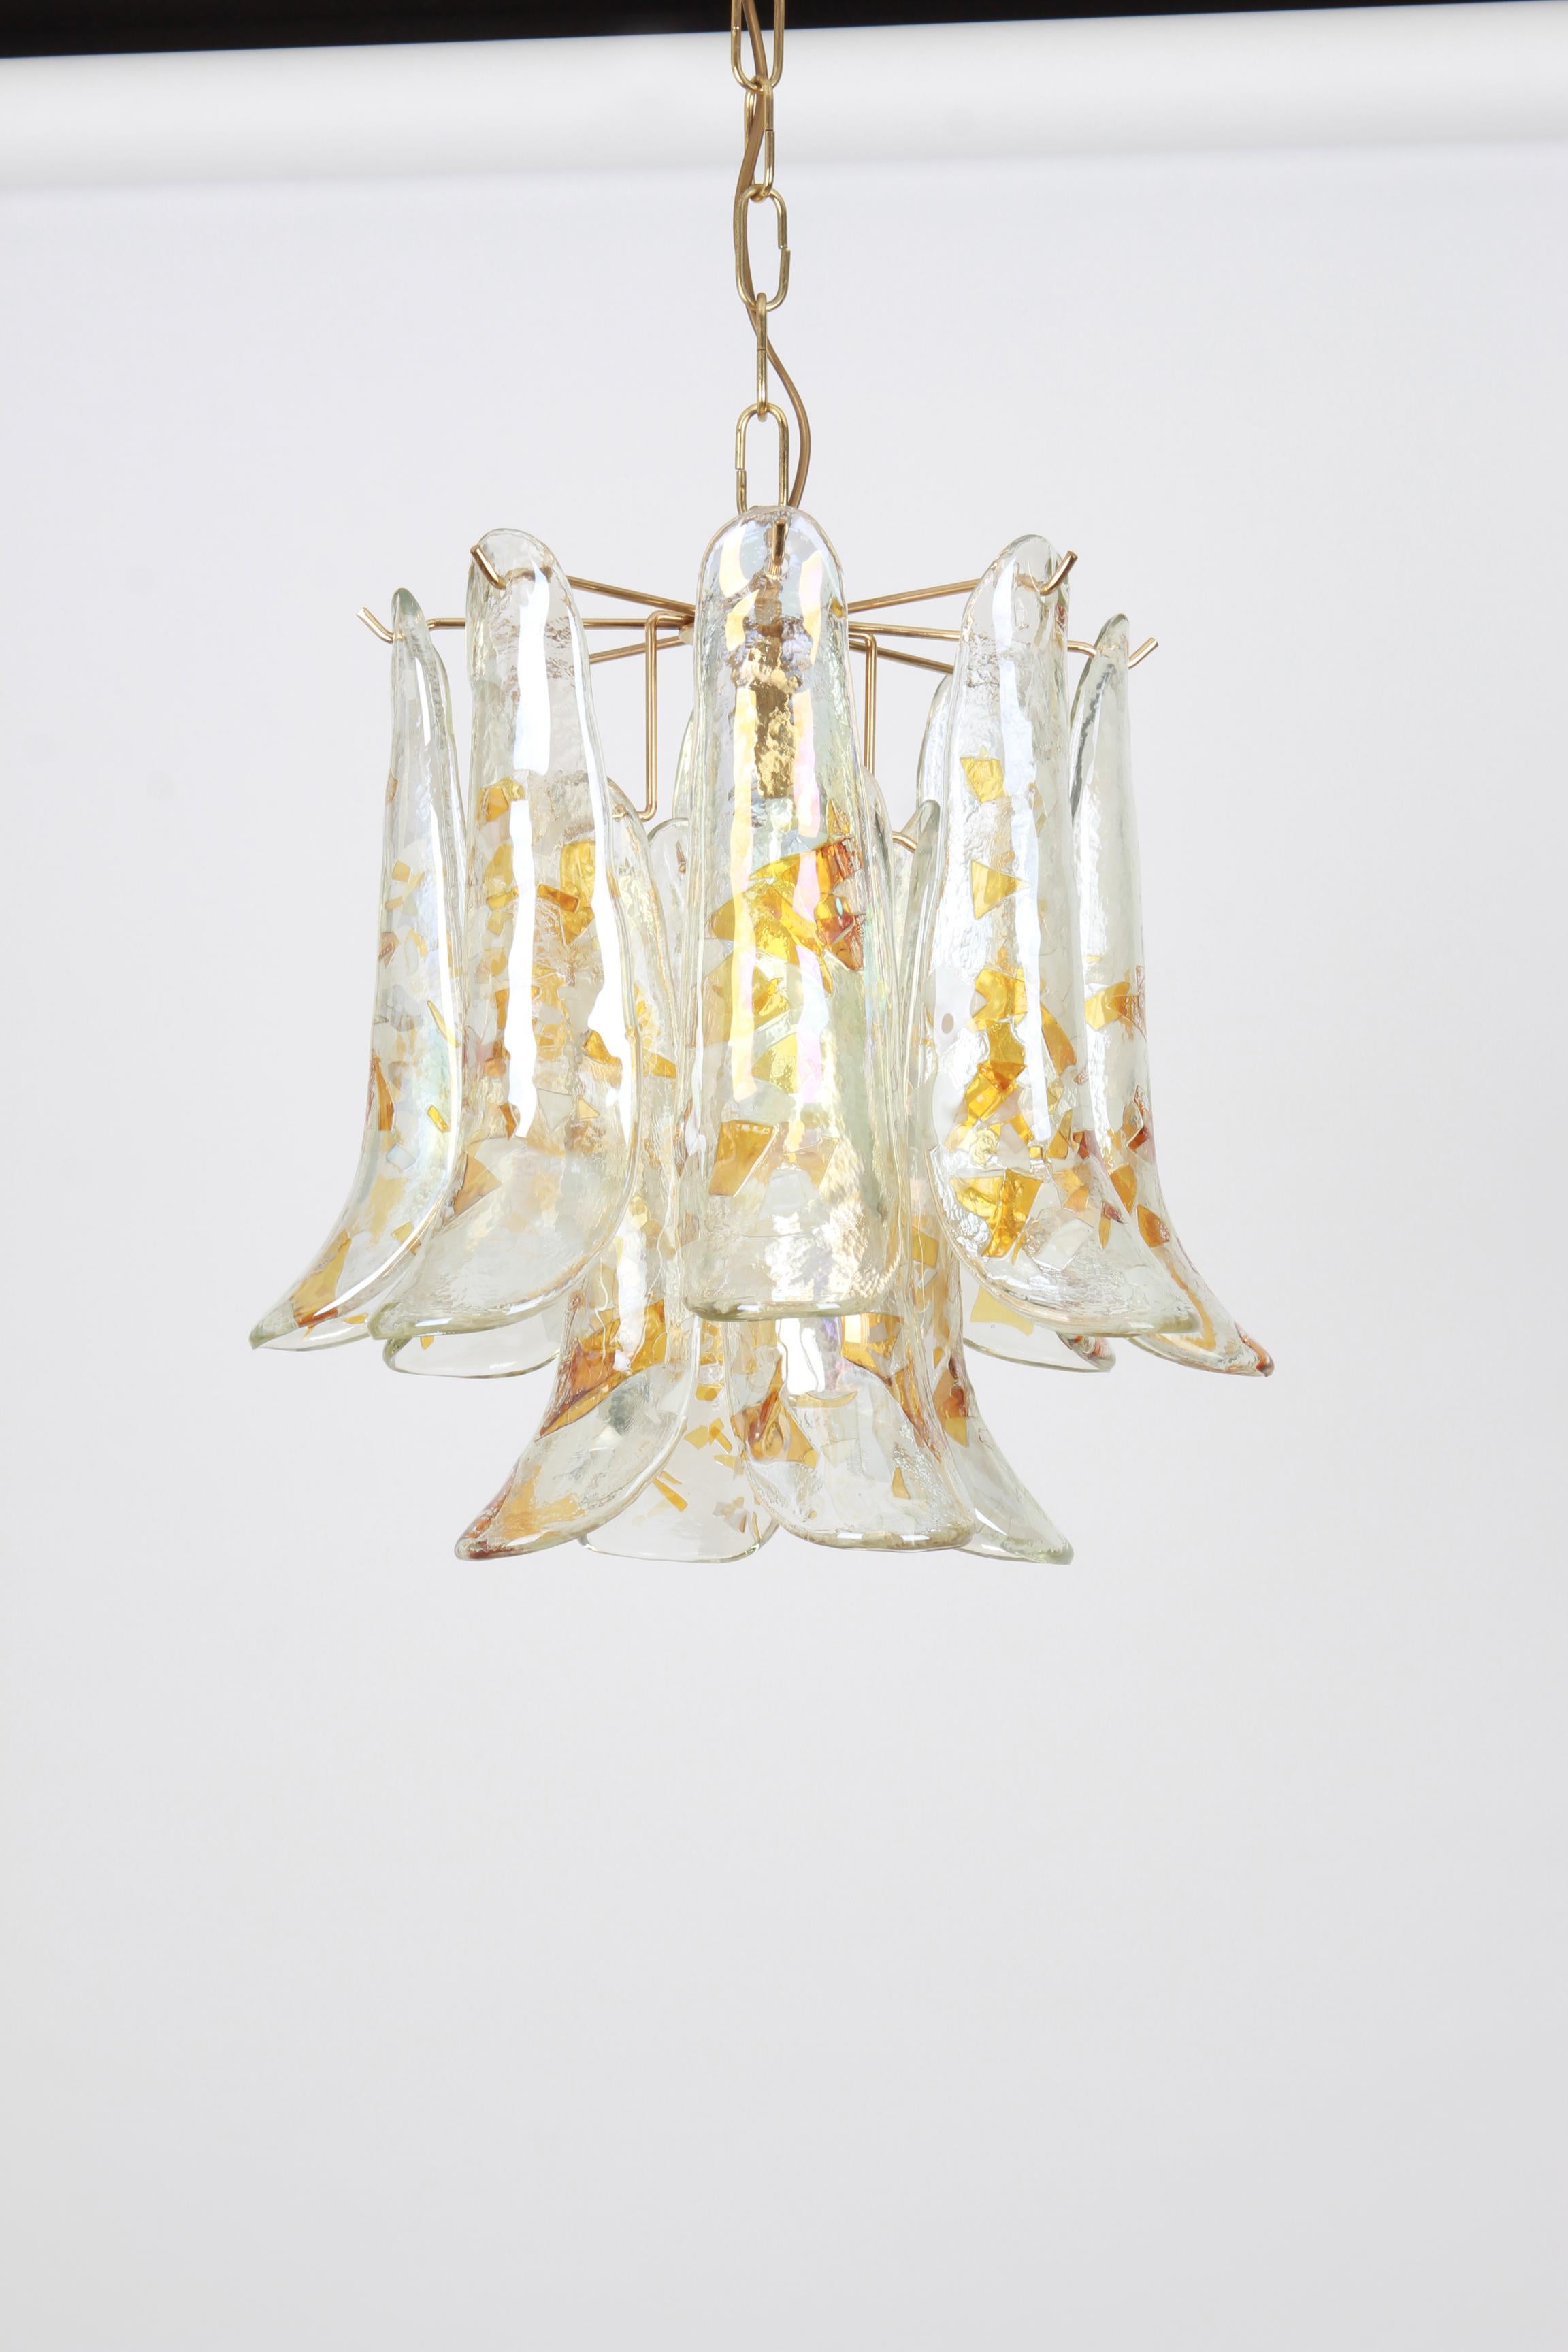 A stunning Murano glass chandelier designed by Carlo Nason for Mazzega, Italy, manufactured in the 1970s.
The chandelier is composed of 12 thick textured glass elements attached to a brass metal frame.

High quality, very good condition. Cleaned,